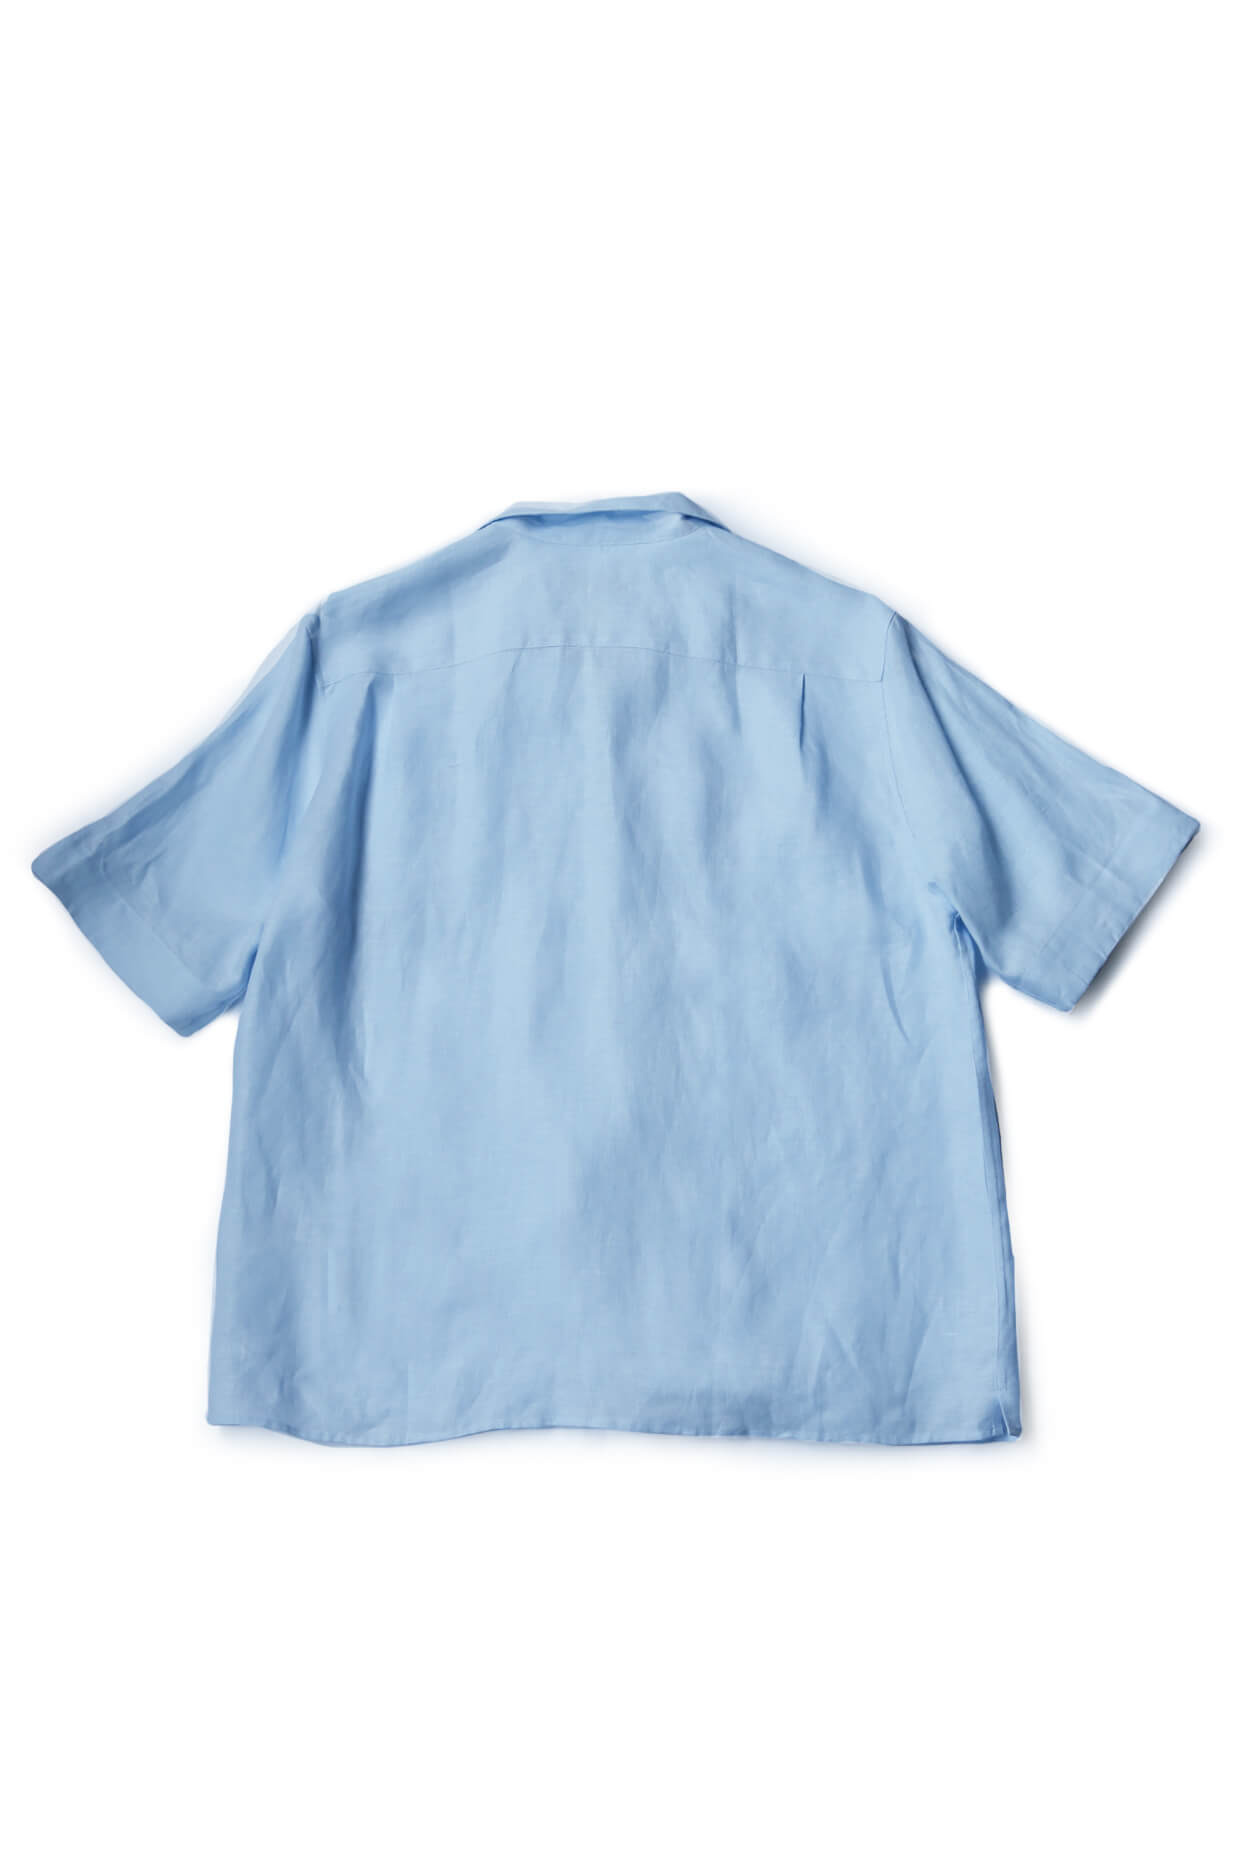 OPEN COLLARED SHIRT - BABY BLUE